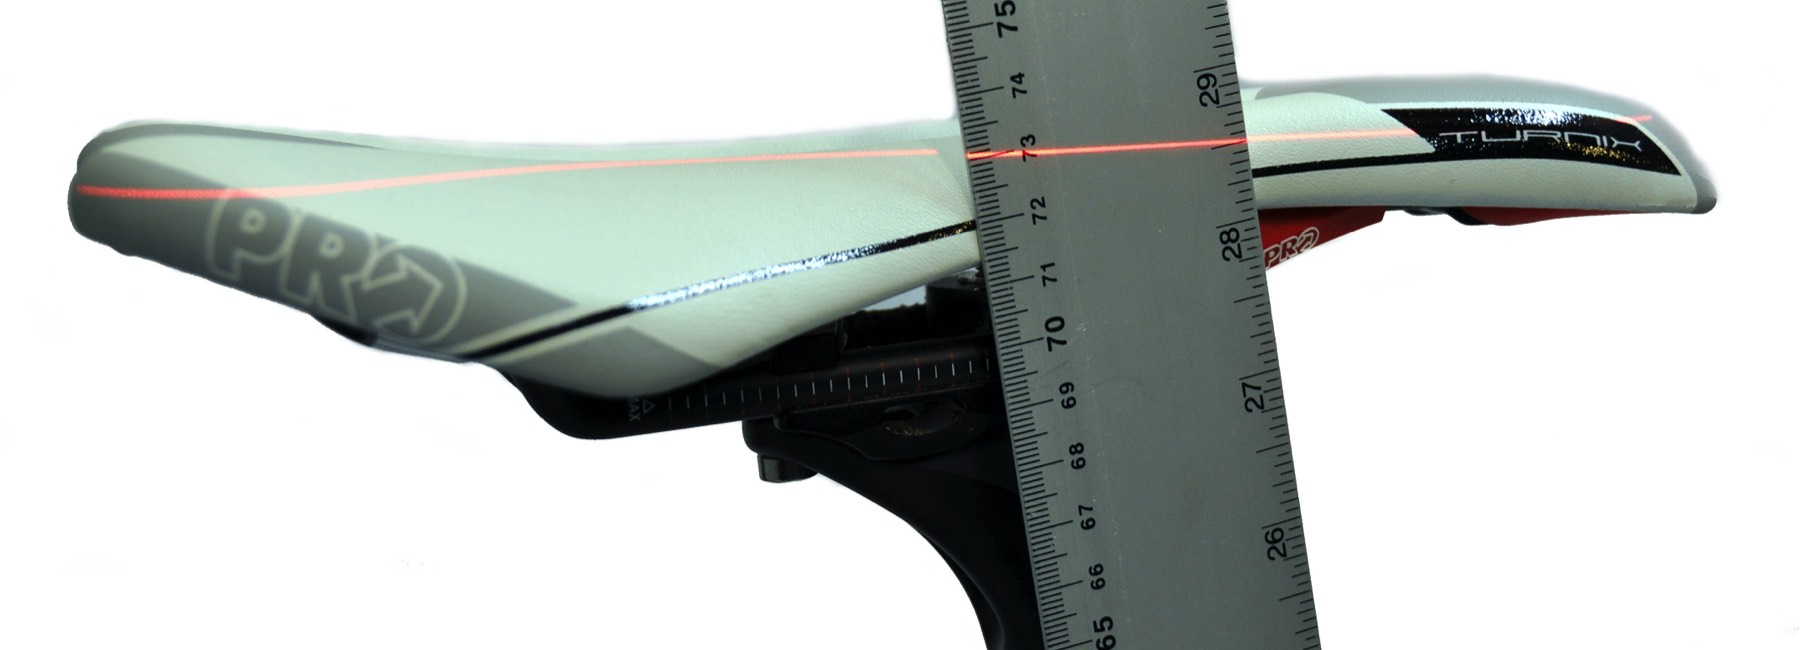 showing saddle height measurement